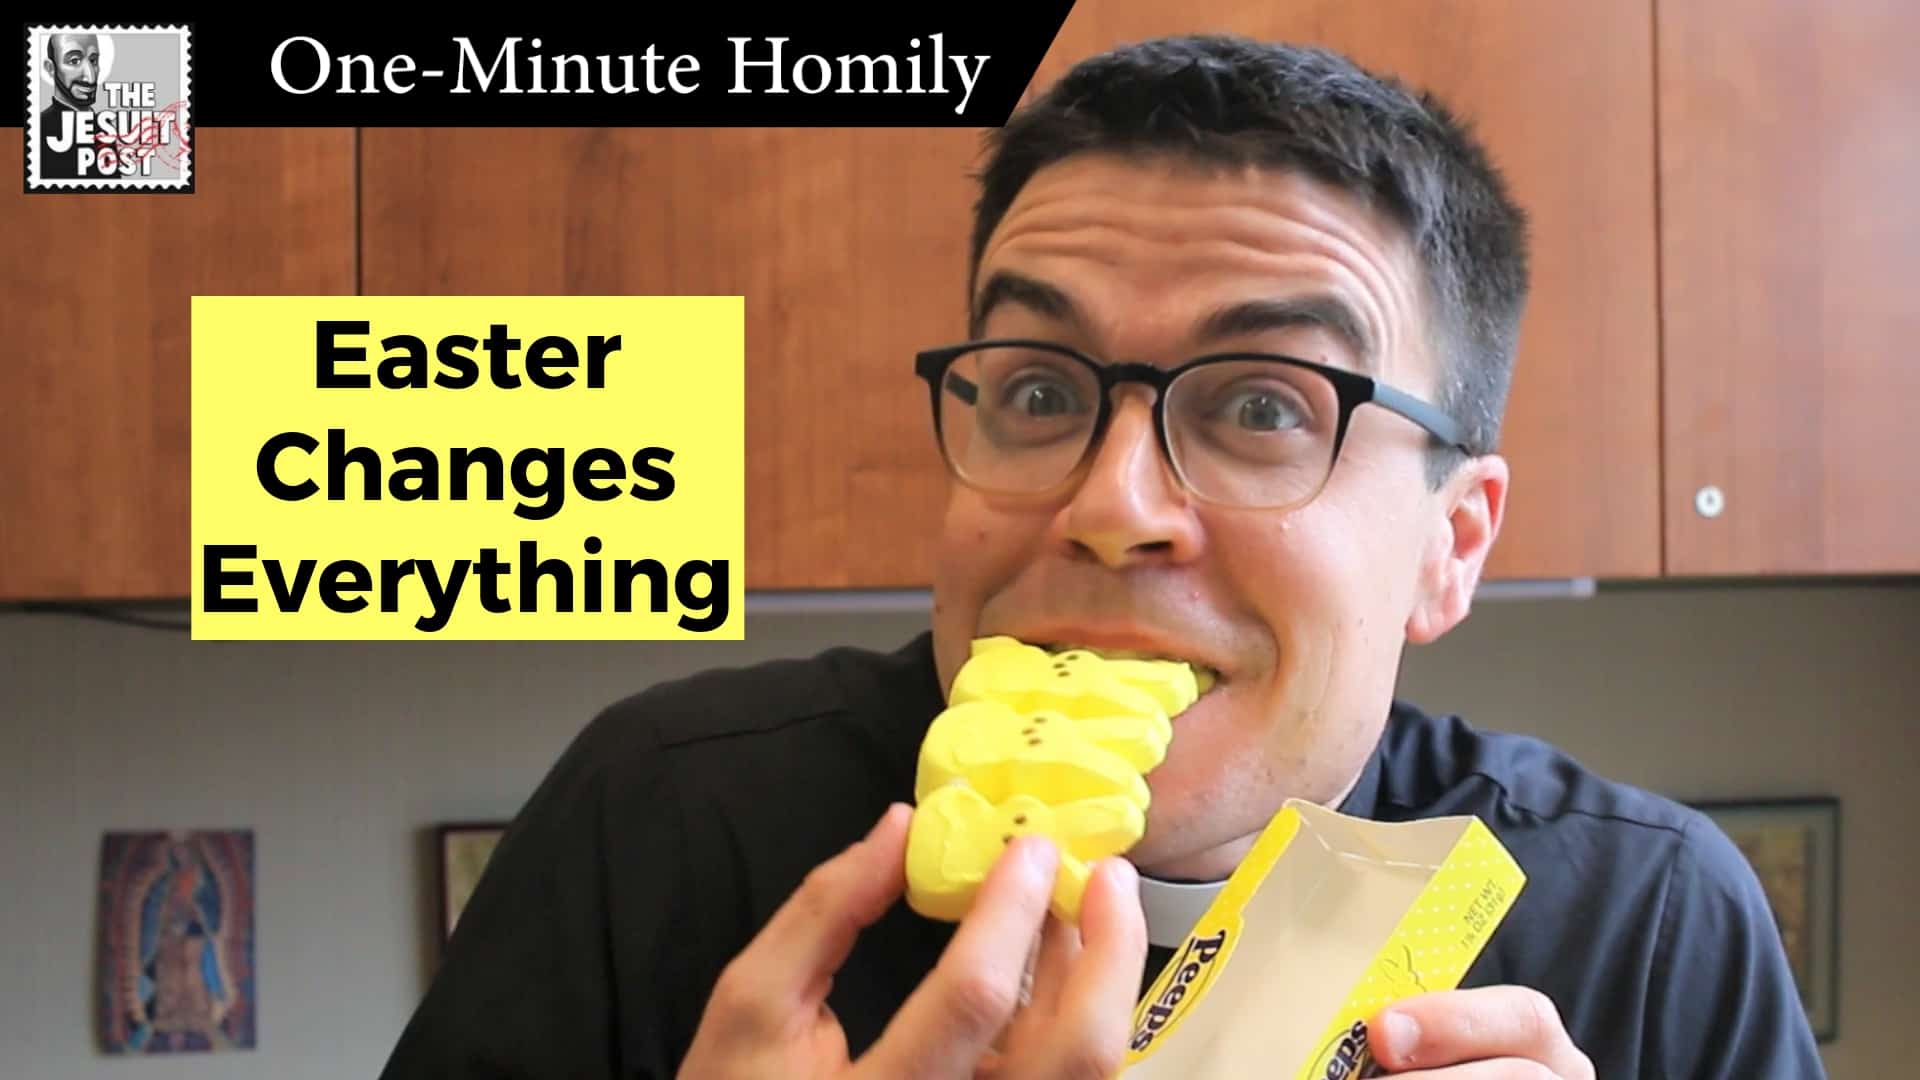 One-Minute Homily: “Easter Changes Everything”